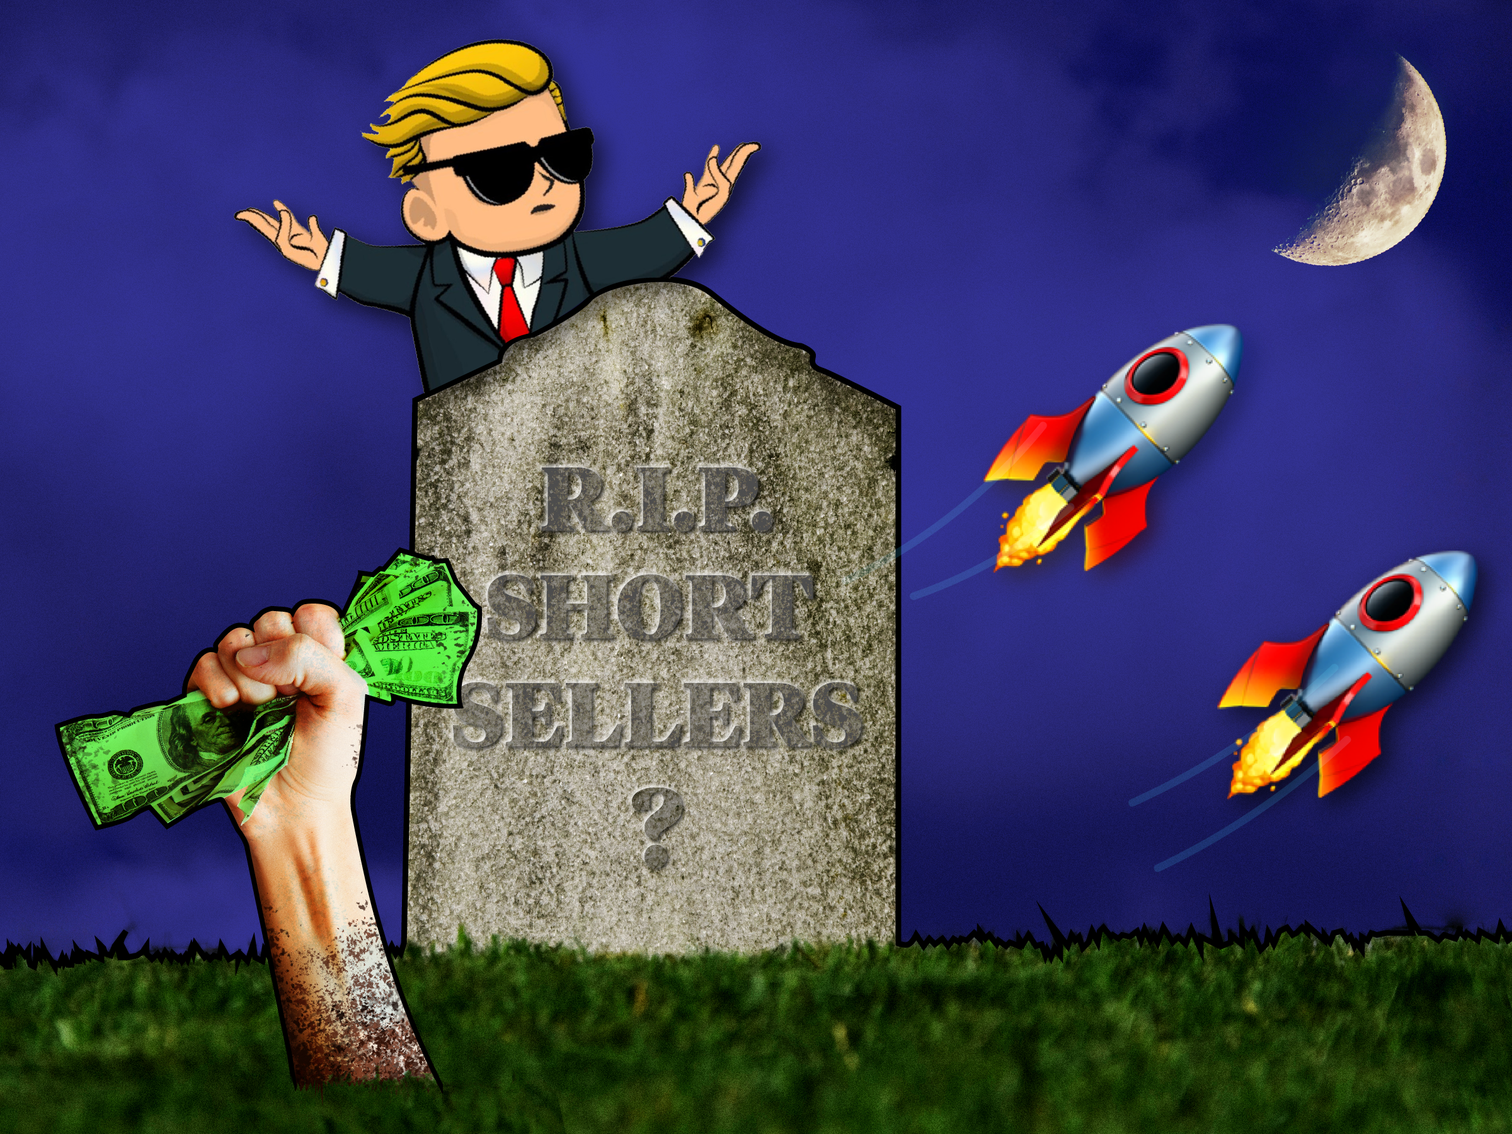 A fist clutching a wad of cash emerging out of a grave that says "R.I.P. SHORT SELLERS?", against a night sky with rocket emojis flying towards the moon and the wallstreetbets reddit character popping out from behind the gravestone